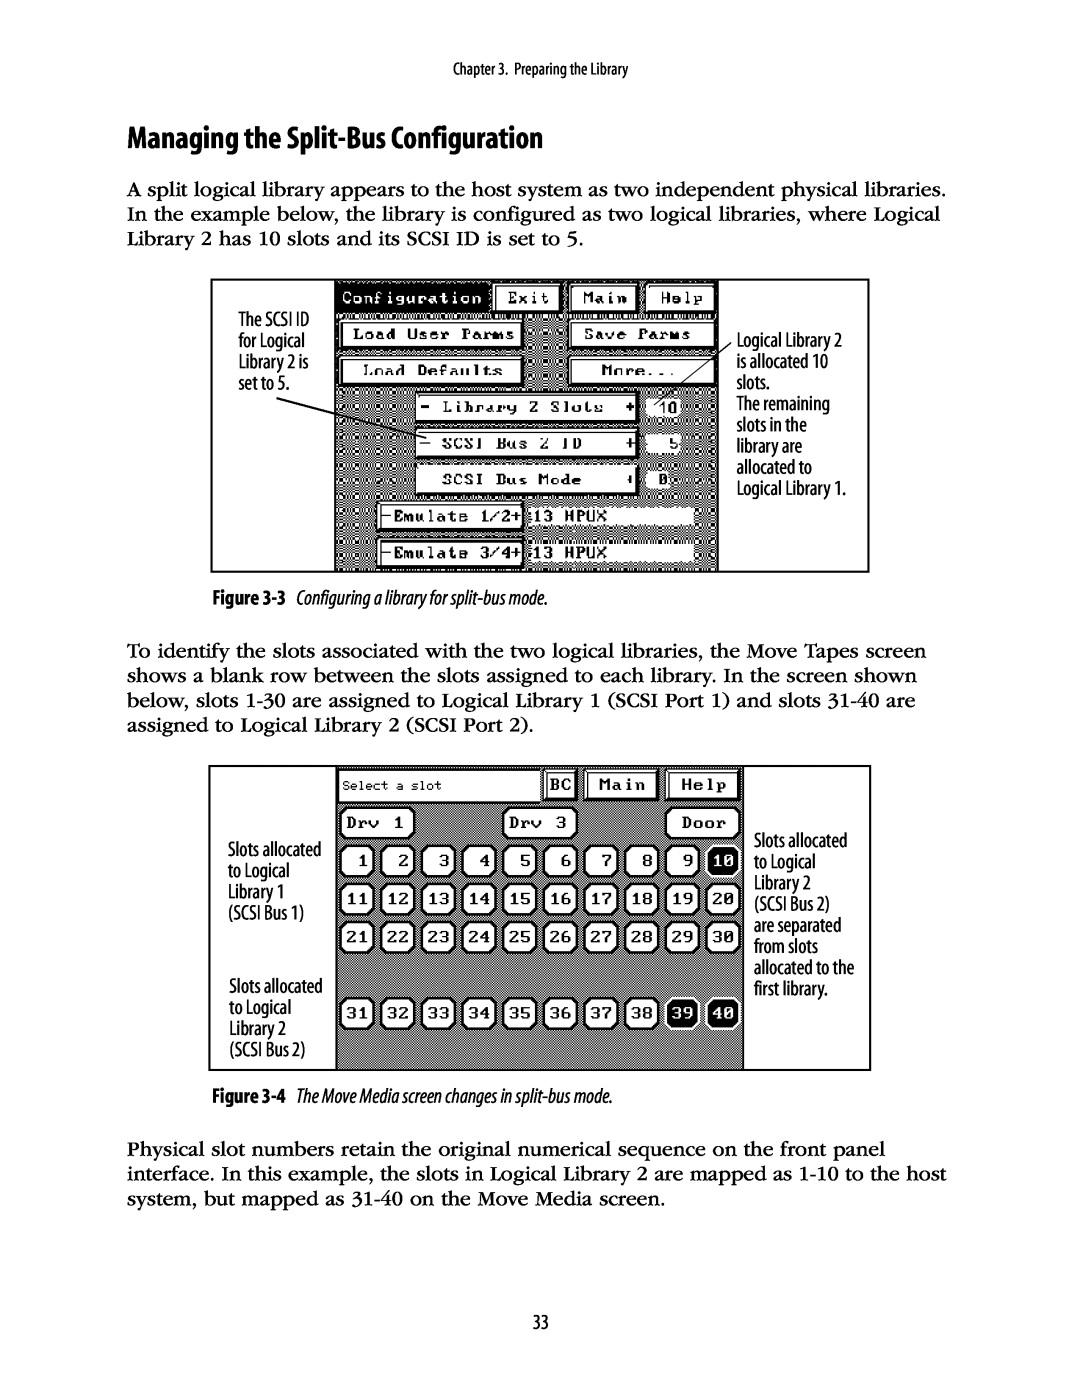 Spectra Logic 10000 manual Managing the Split-Bus Configuration, 3 Configuring a library for split-bus mode 